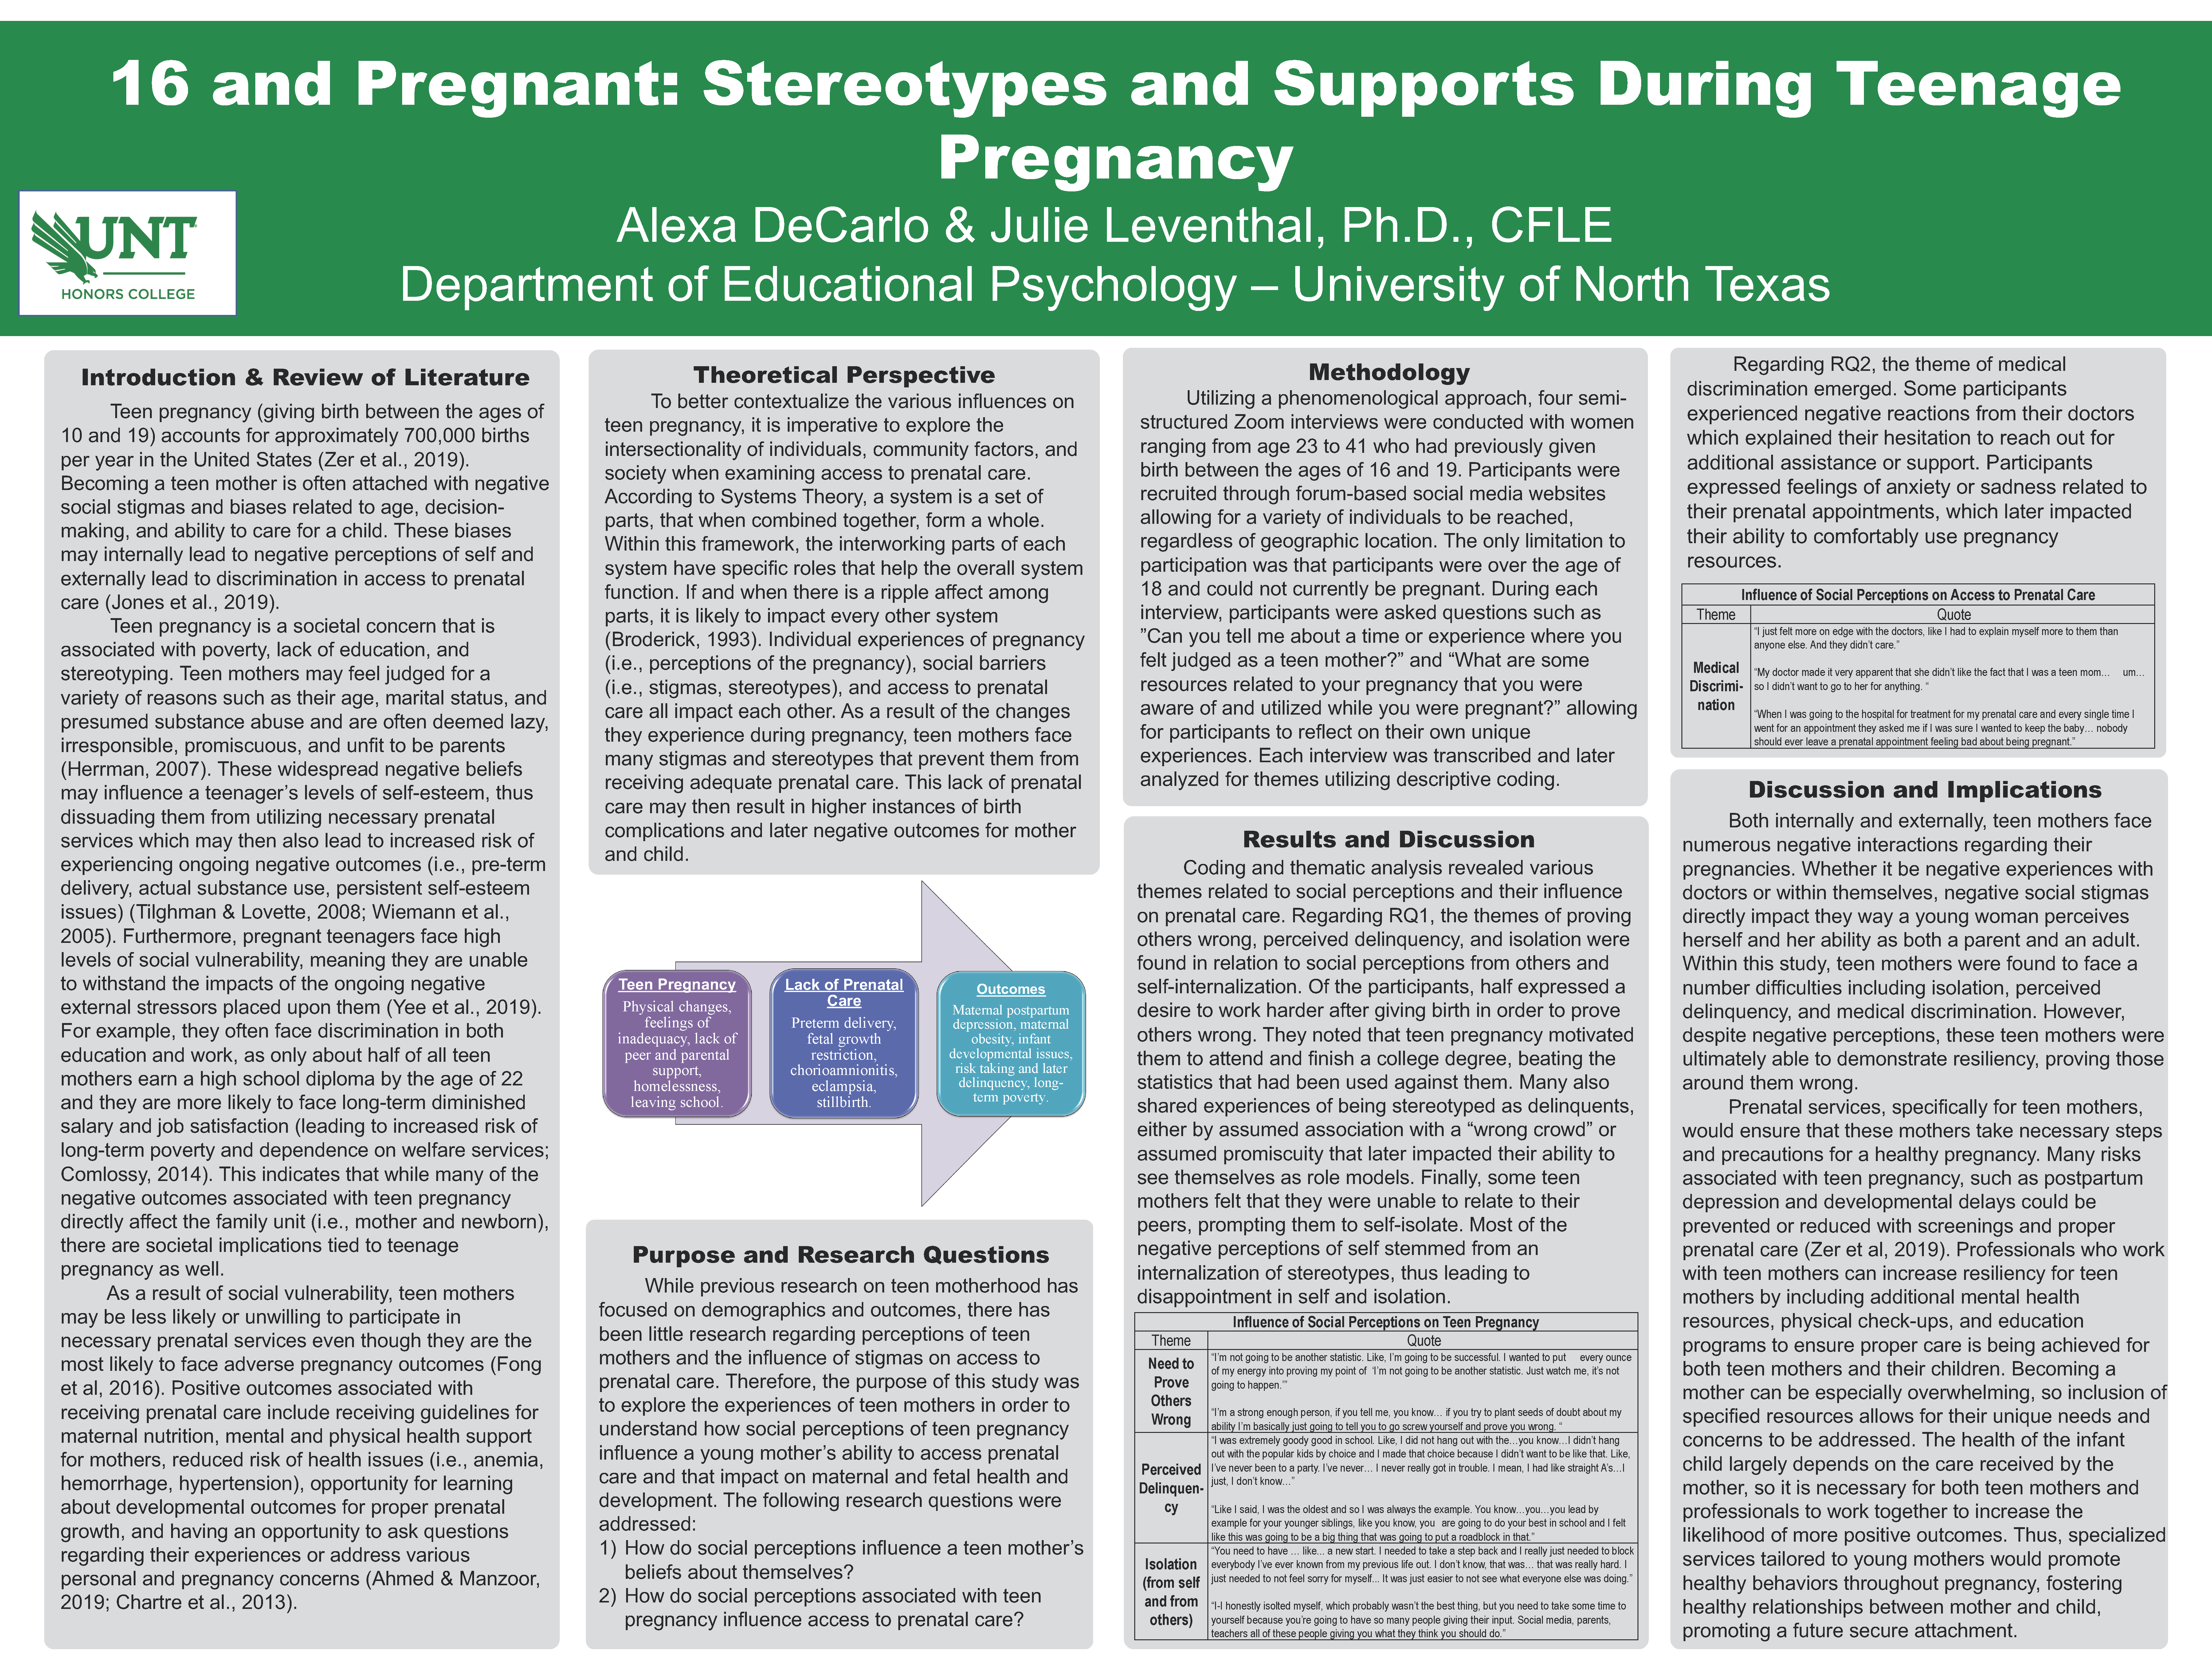 16 and Pregnant: Stereotypes and Supports During Teenage Pregnancy